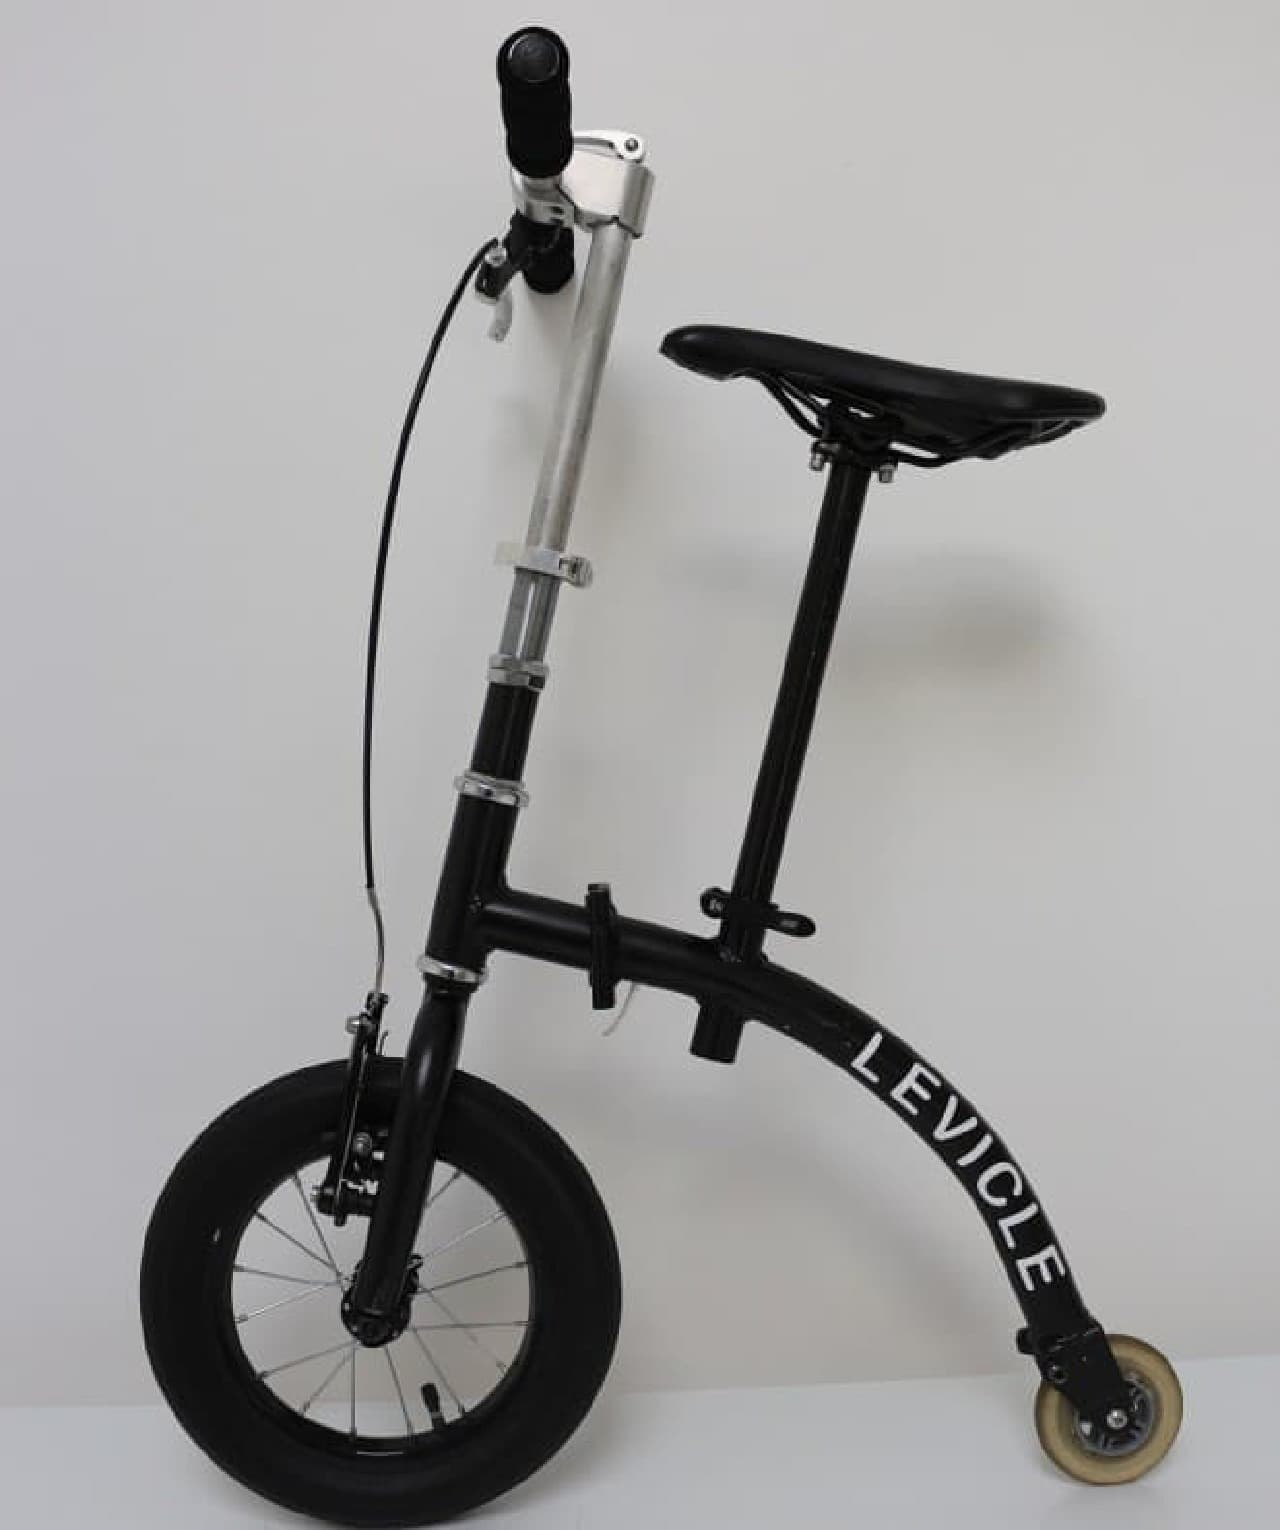 Equipped with a front wheel larger than the kickboard